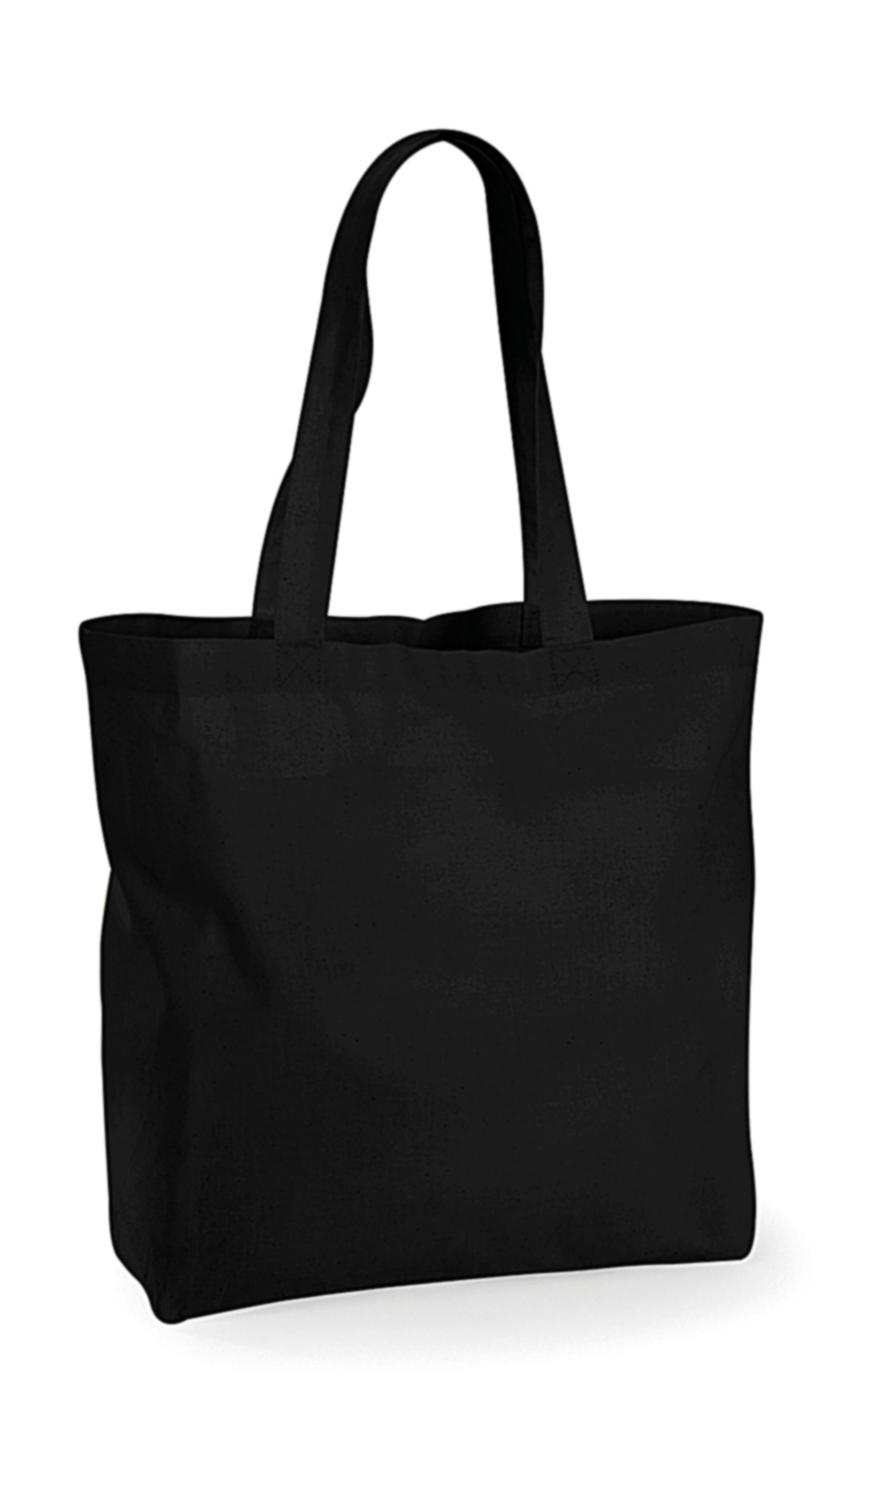  Maxi Bag For Life in Farbe Black